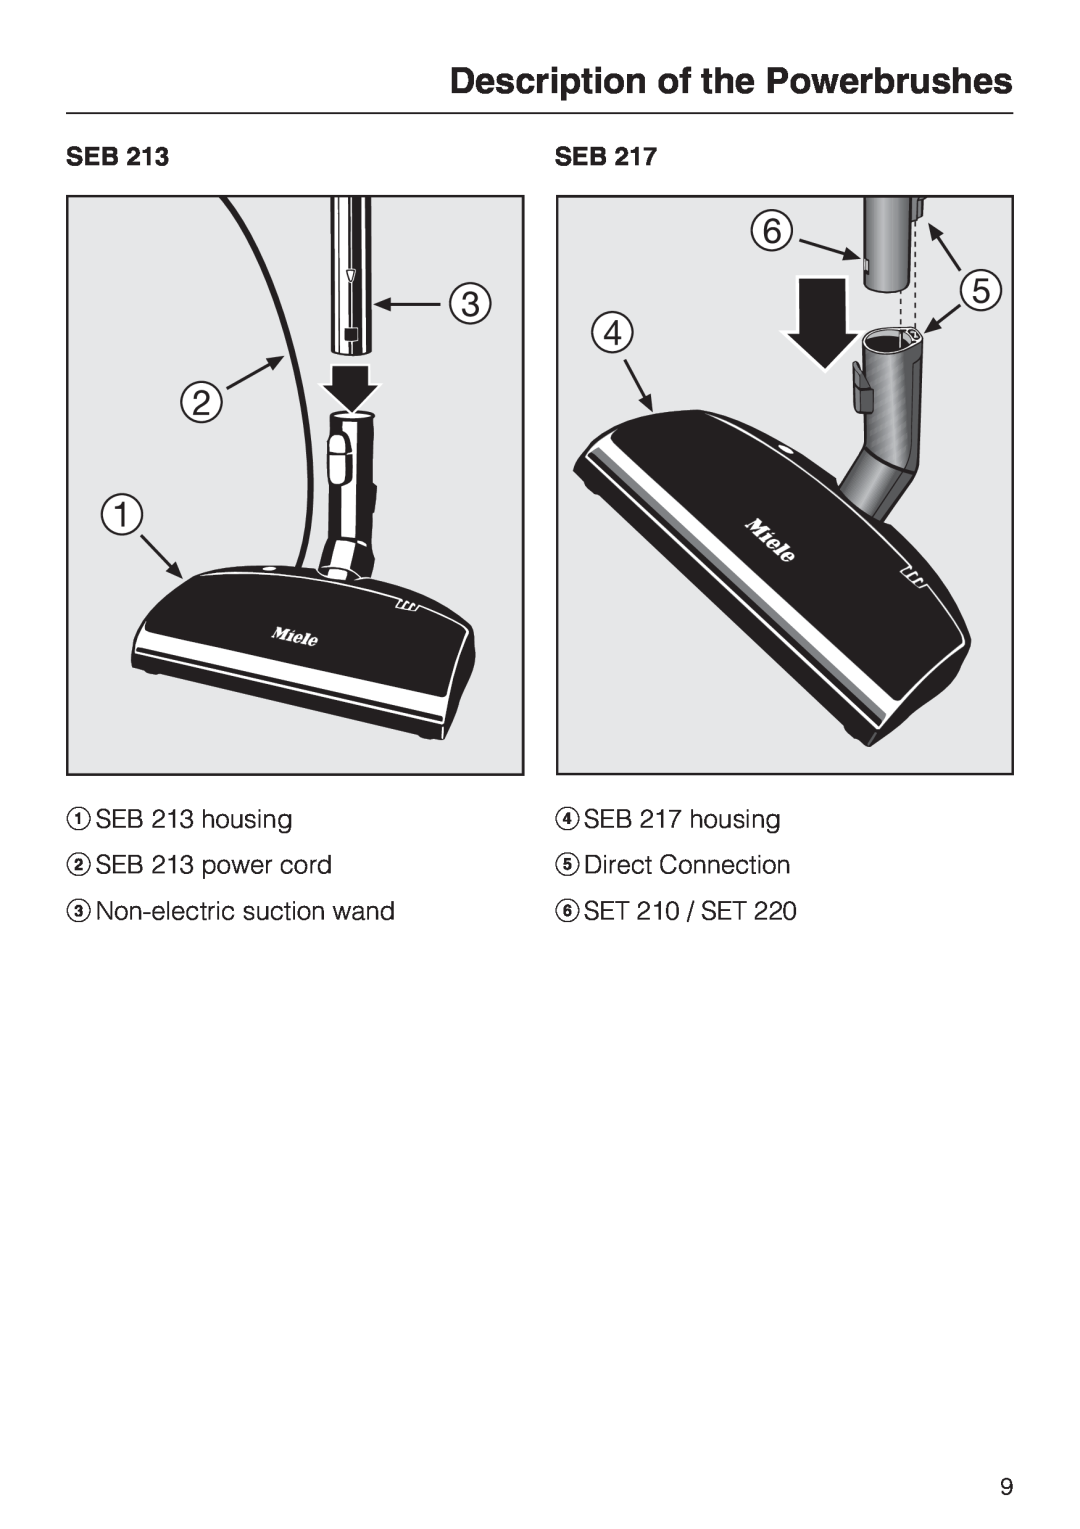 Miele 217-2, 217-3, 213-2 operating instructions Description of the Powerbrushes, SET 210 / SET 